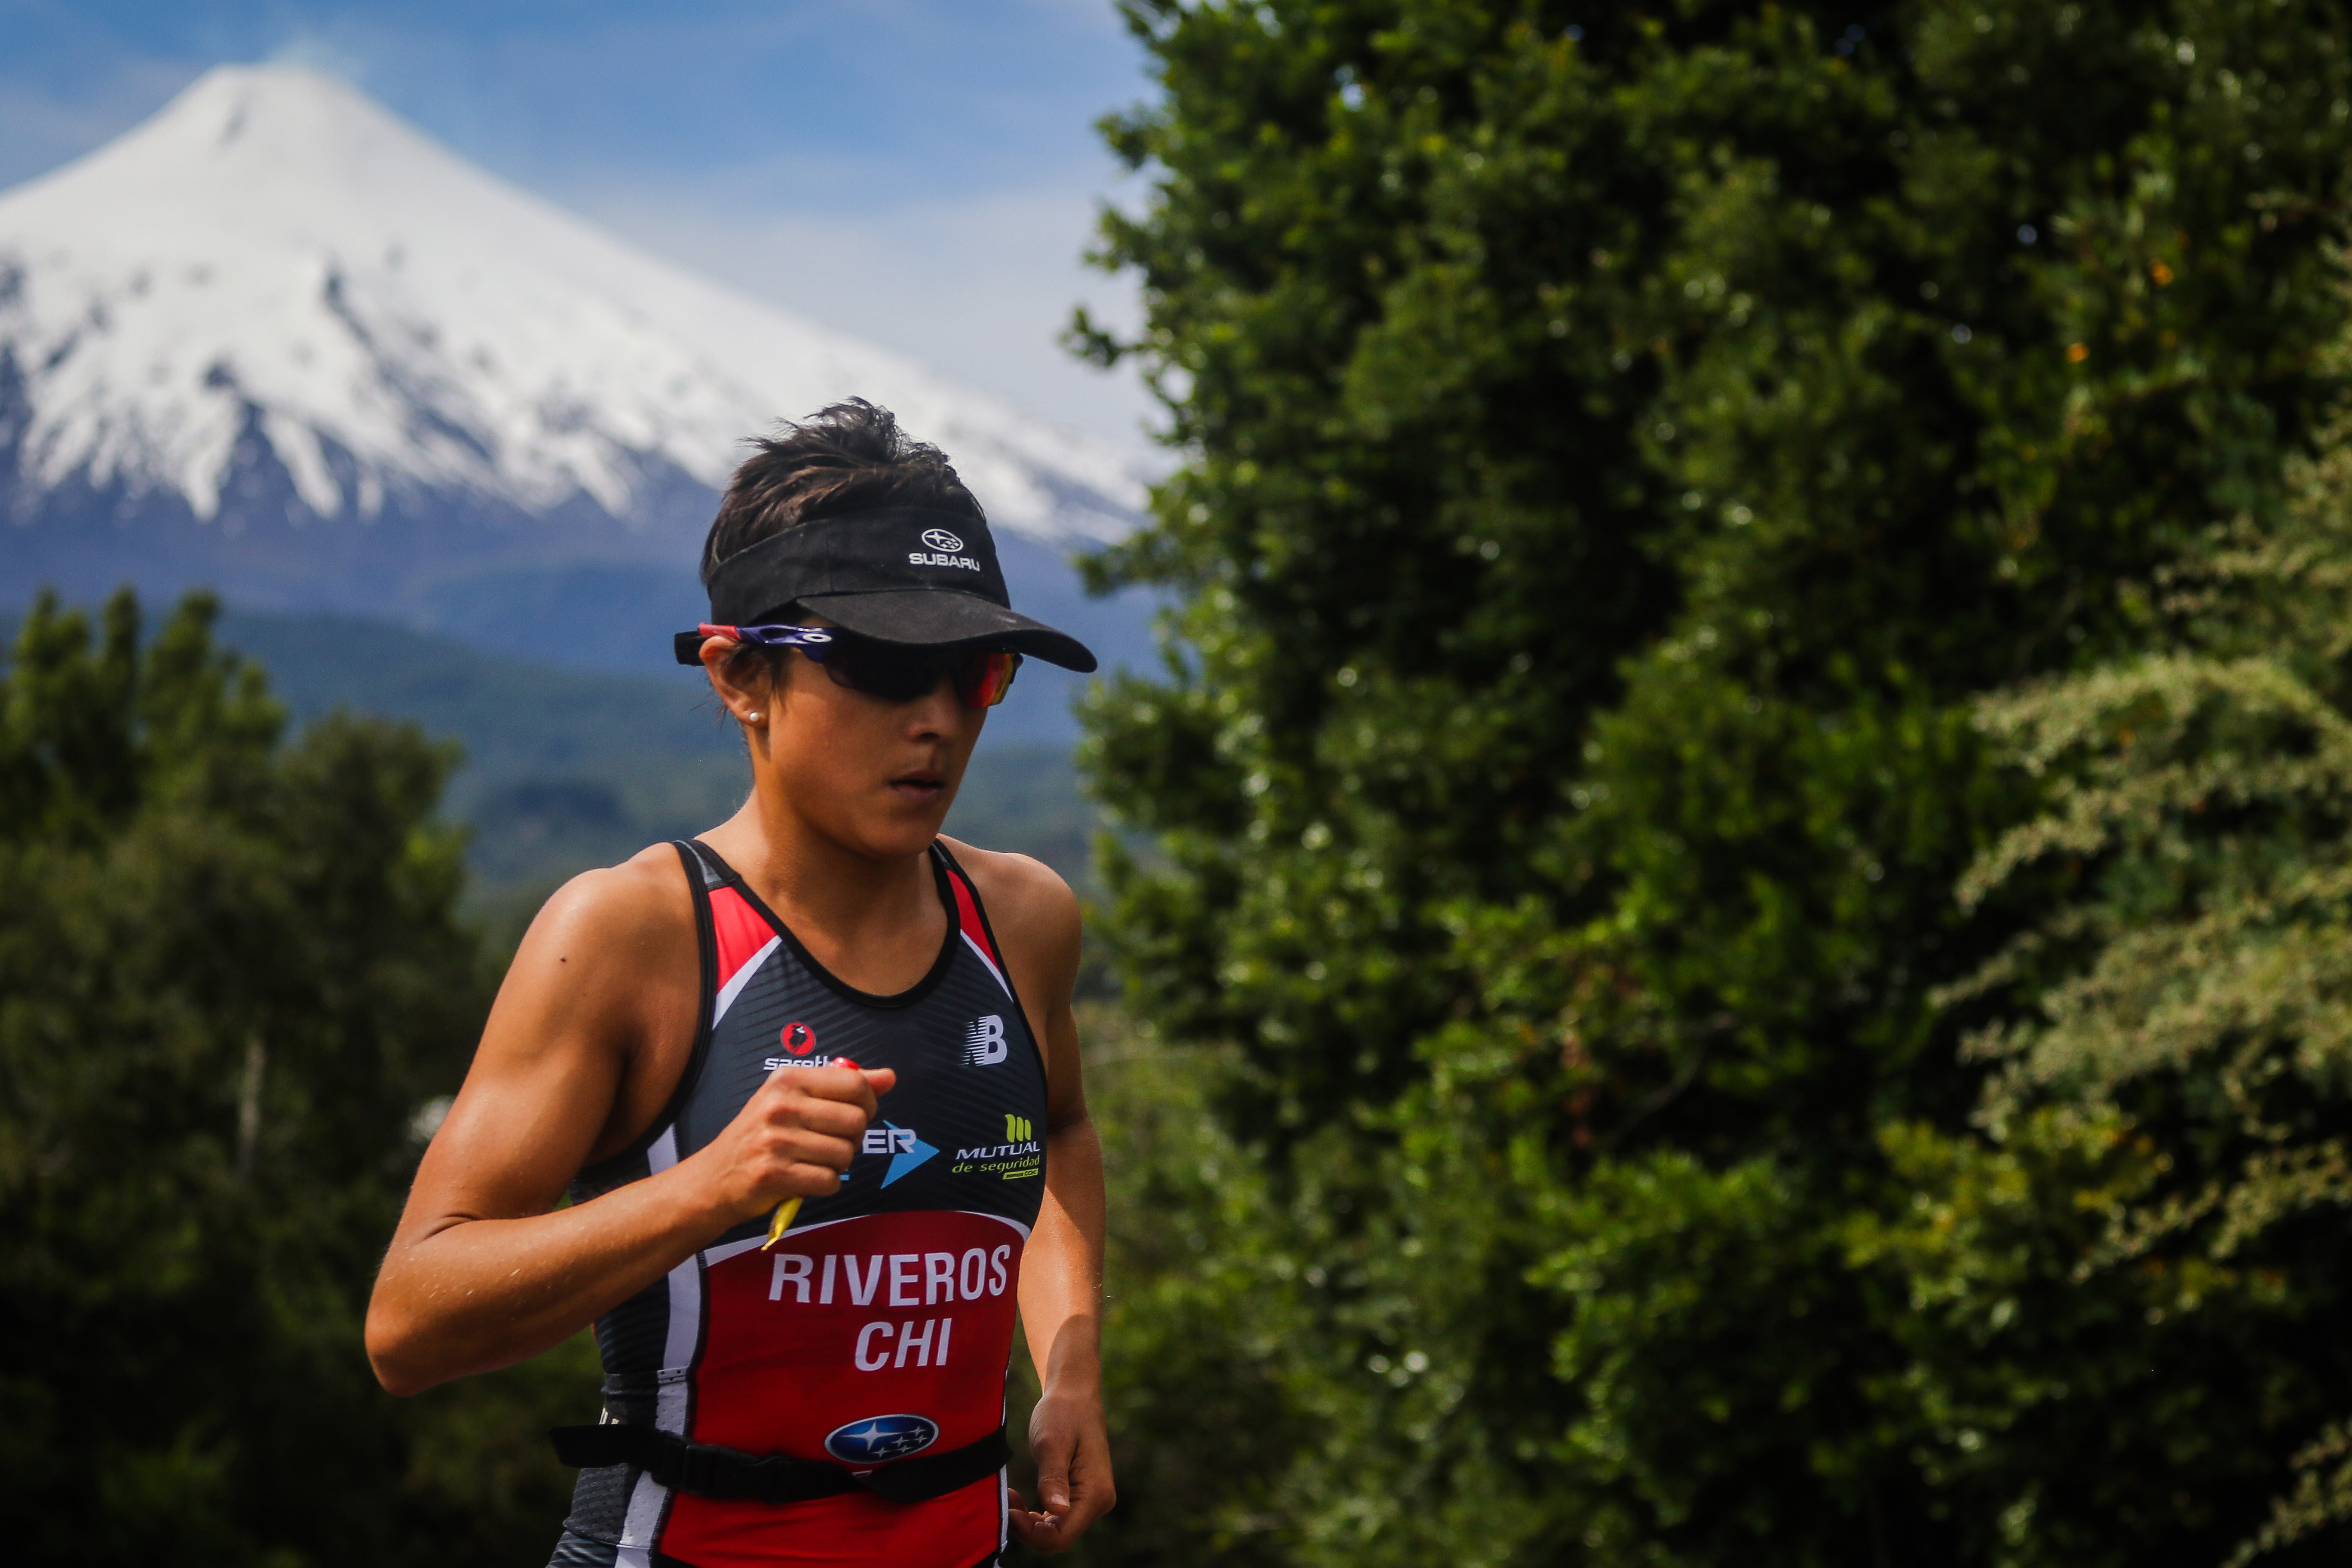 Pucon: Herbalife Ironman 70.3 Pucon 2019